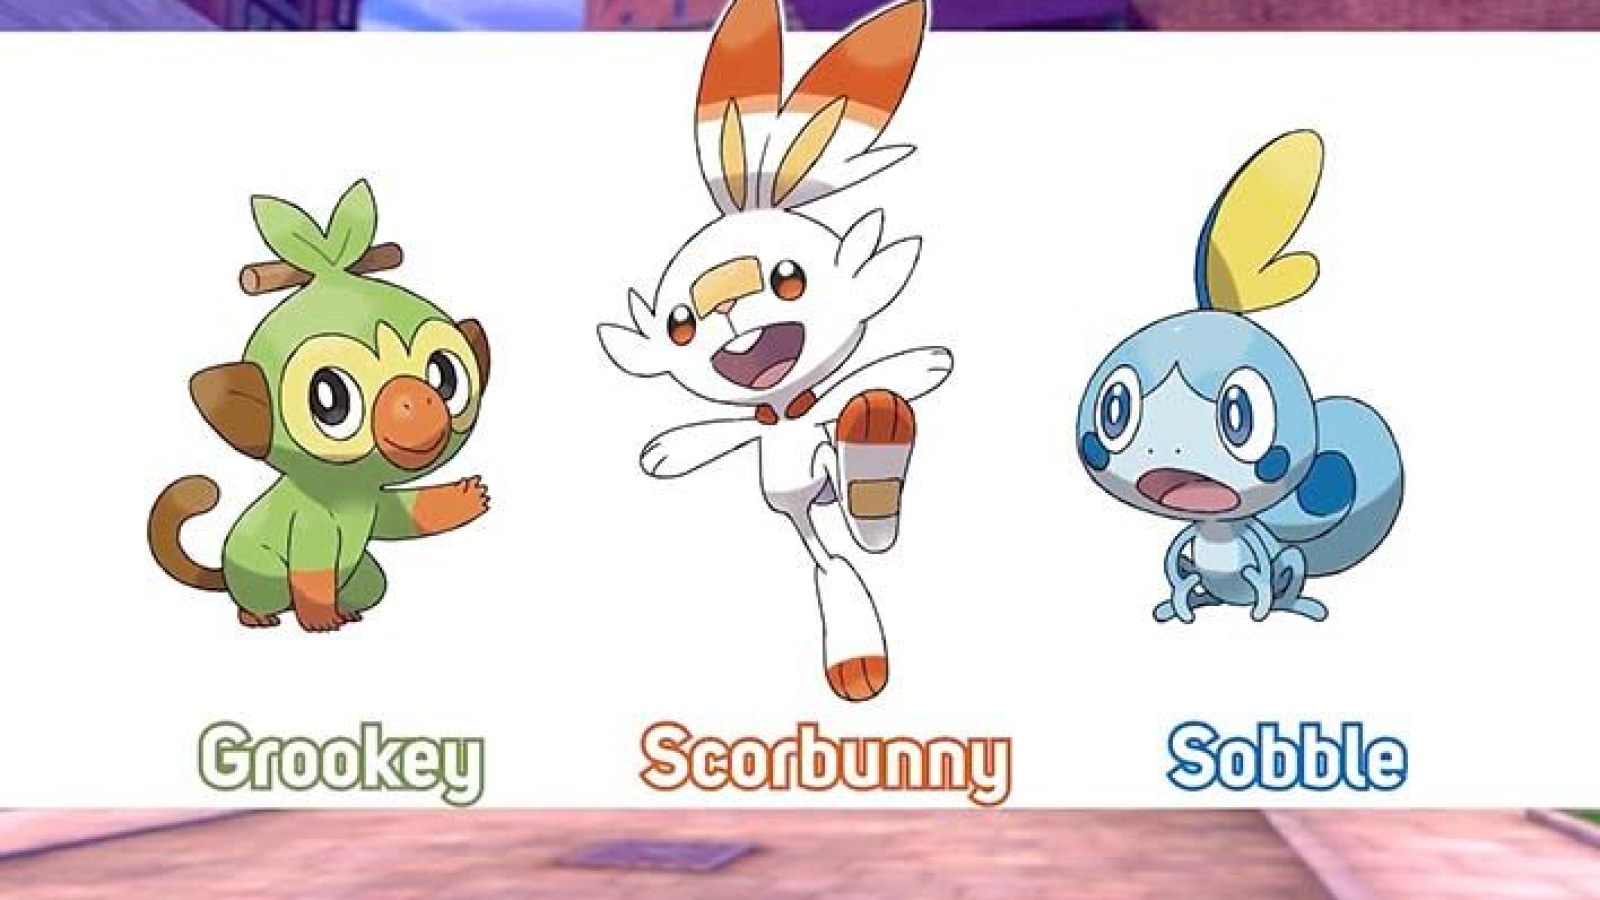 Pokemon Sword and Shield: Predicting Which Pokemon Will Come After